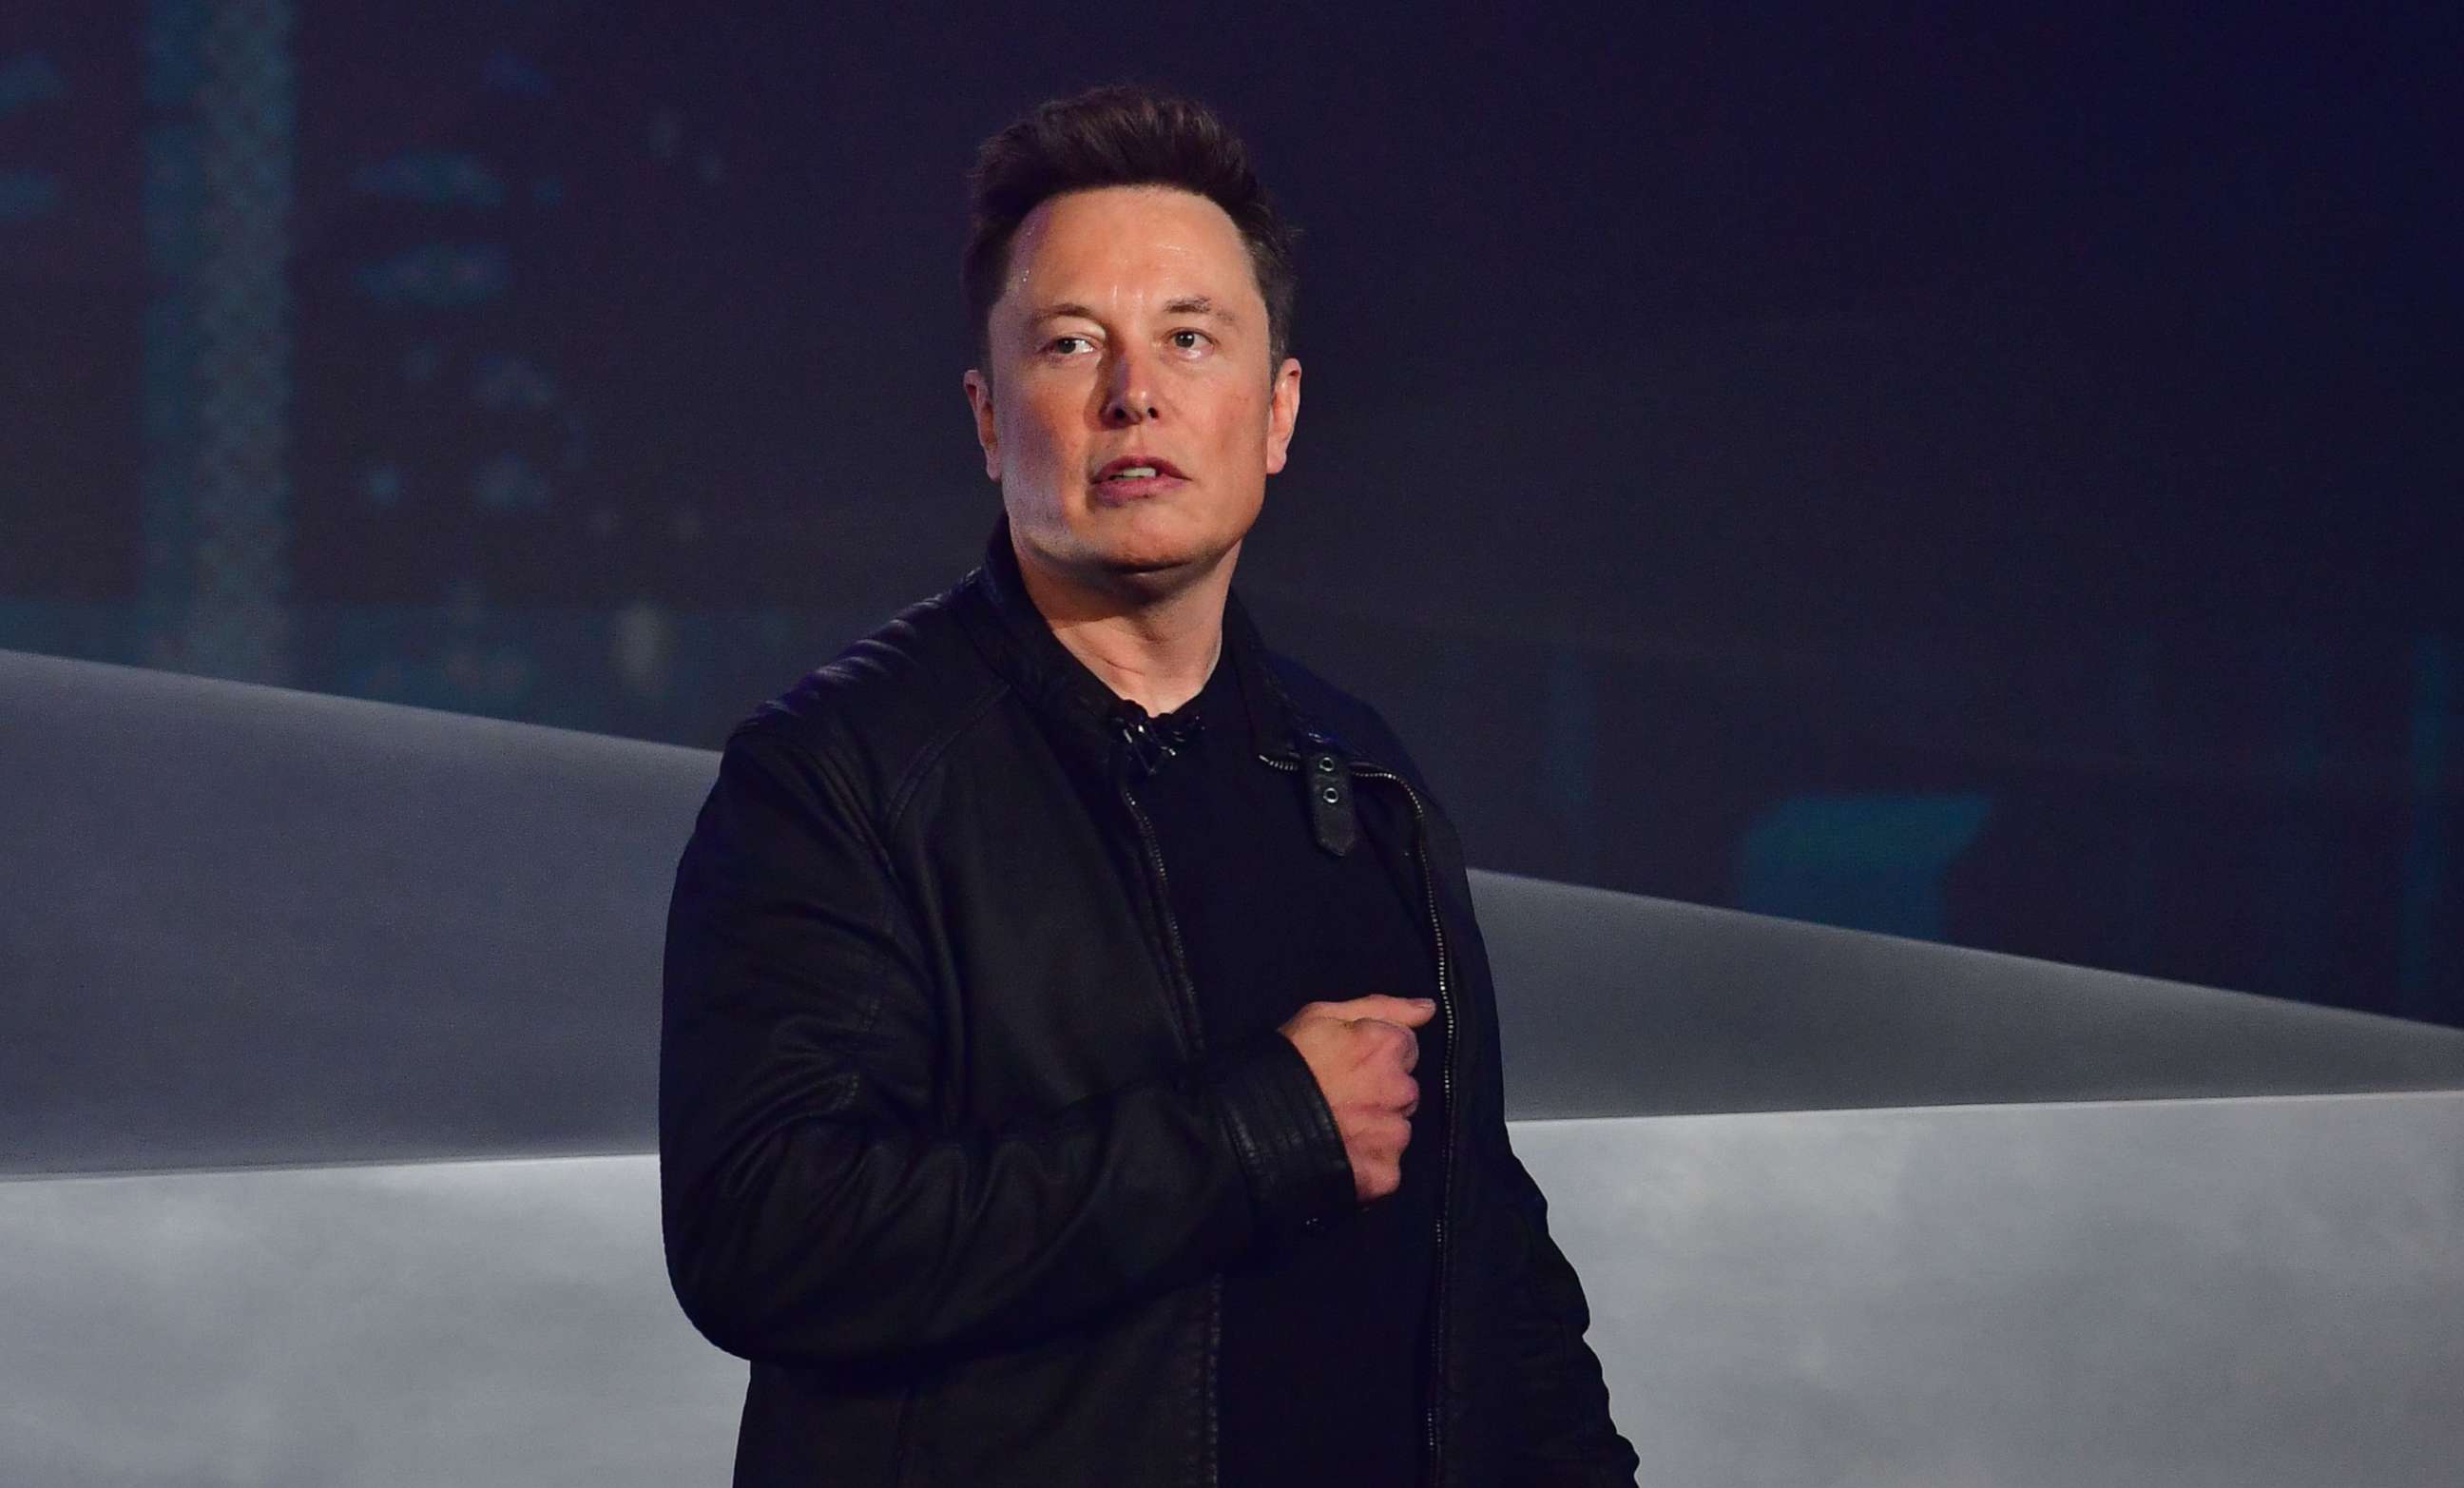 PHOTO: Tesla co-founder and CEO Elon Musk speaks during the unveiling of the all-electric battery-powered Tesla's Cybertruck at Tesla Design Center in Hawthorne, Calif., on Nov. 21, 2019.